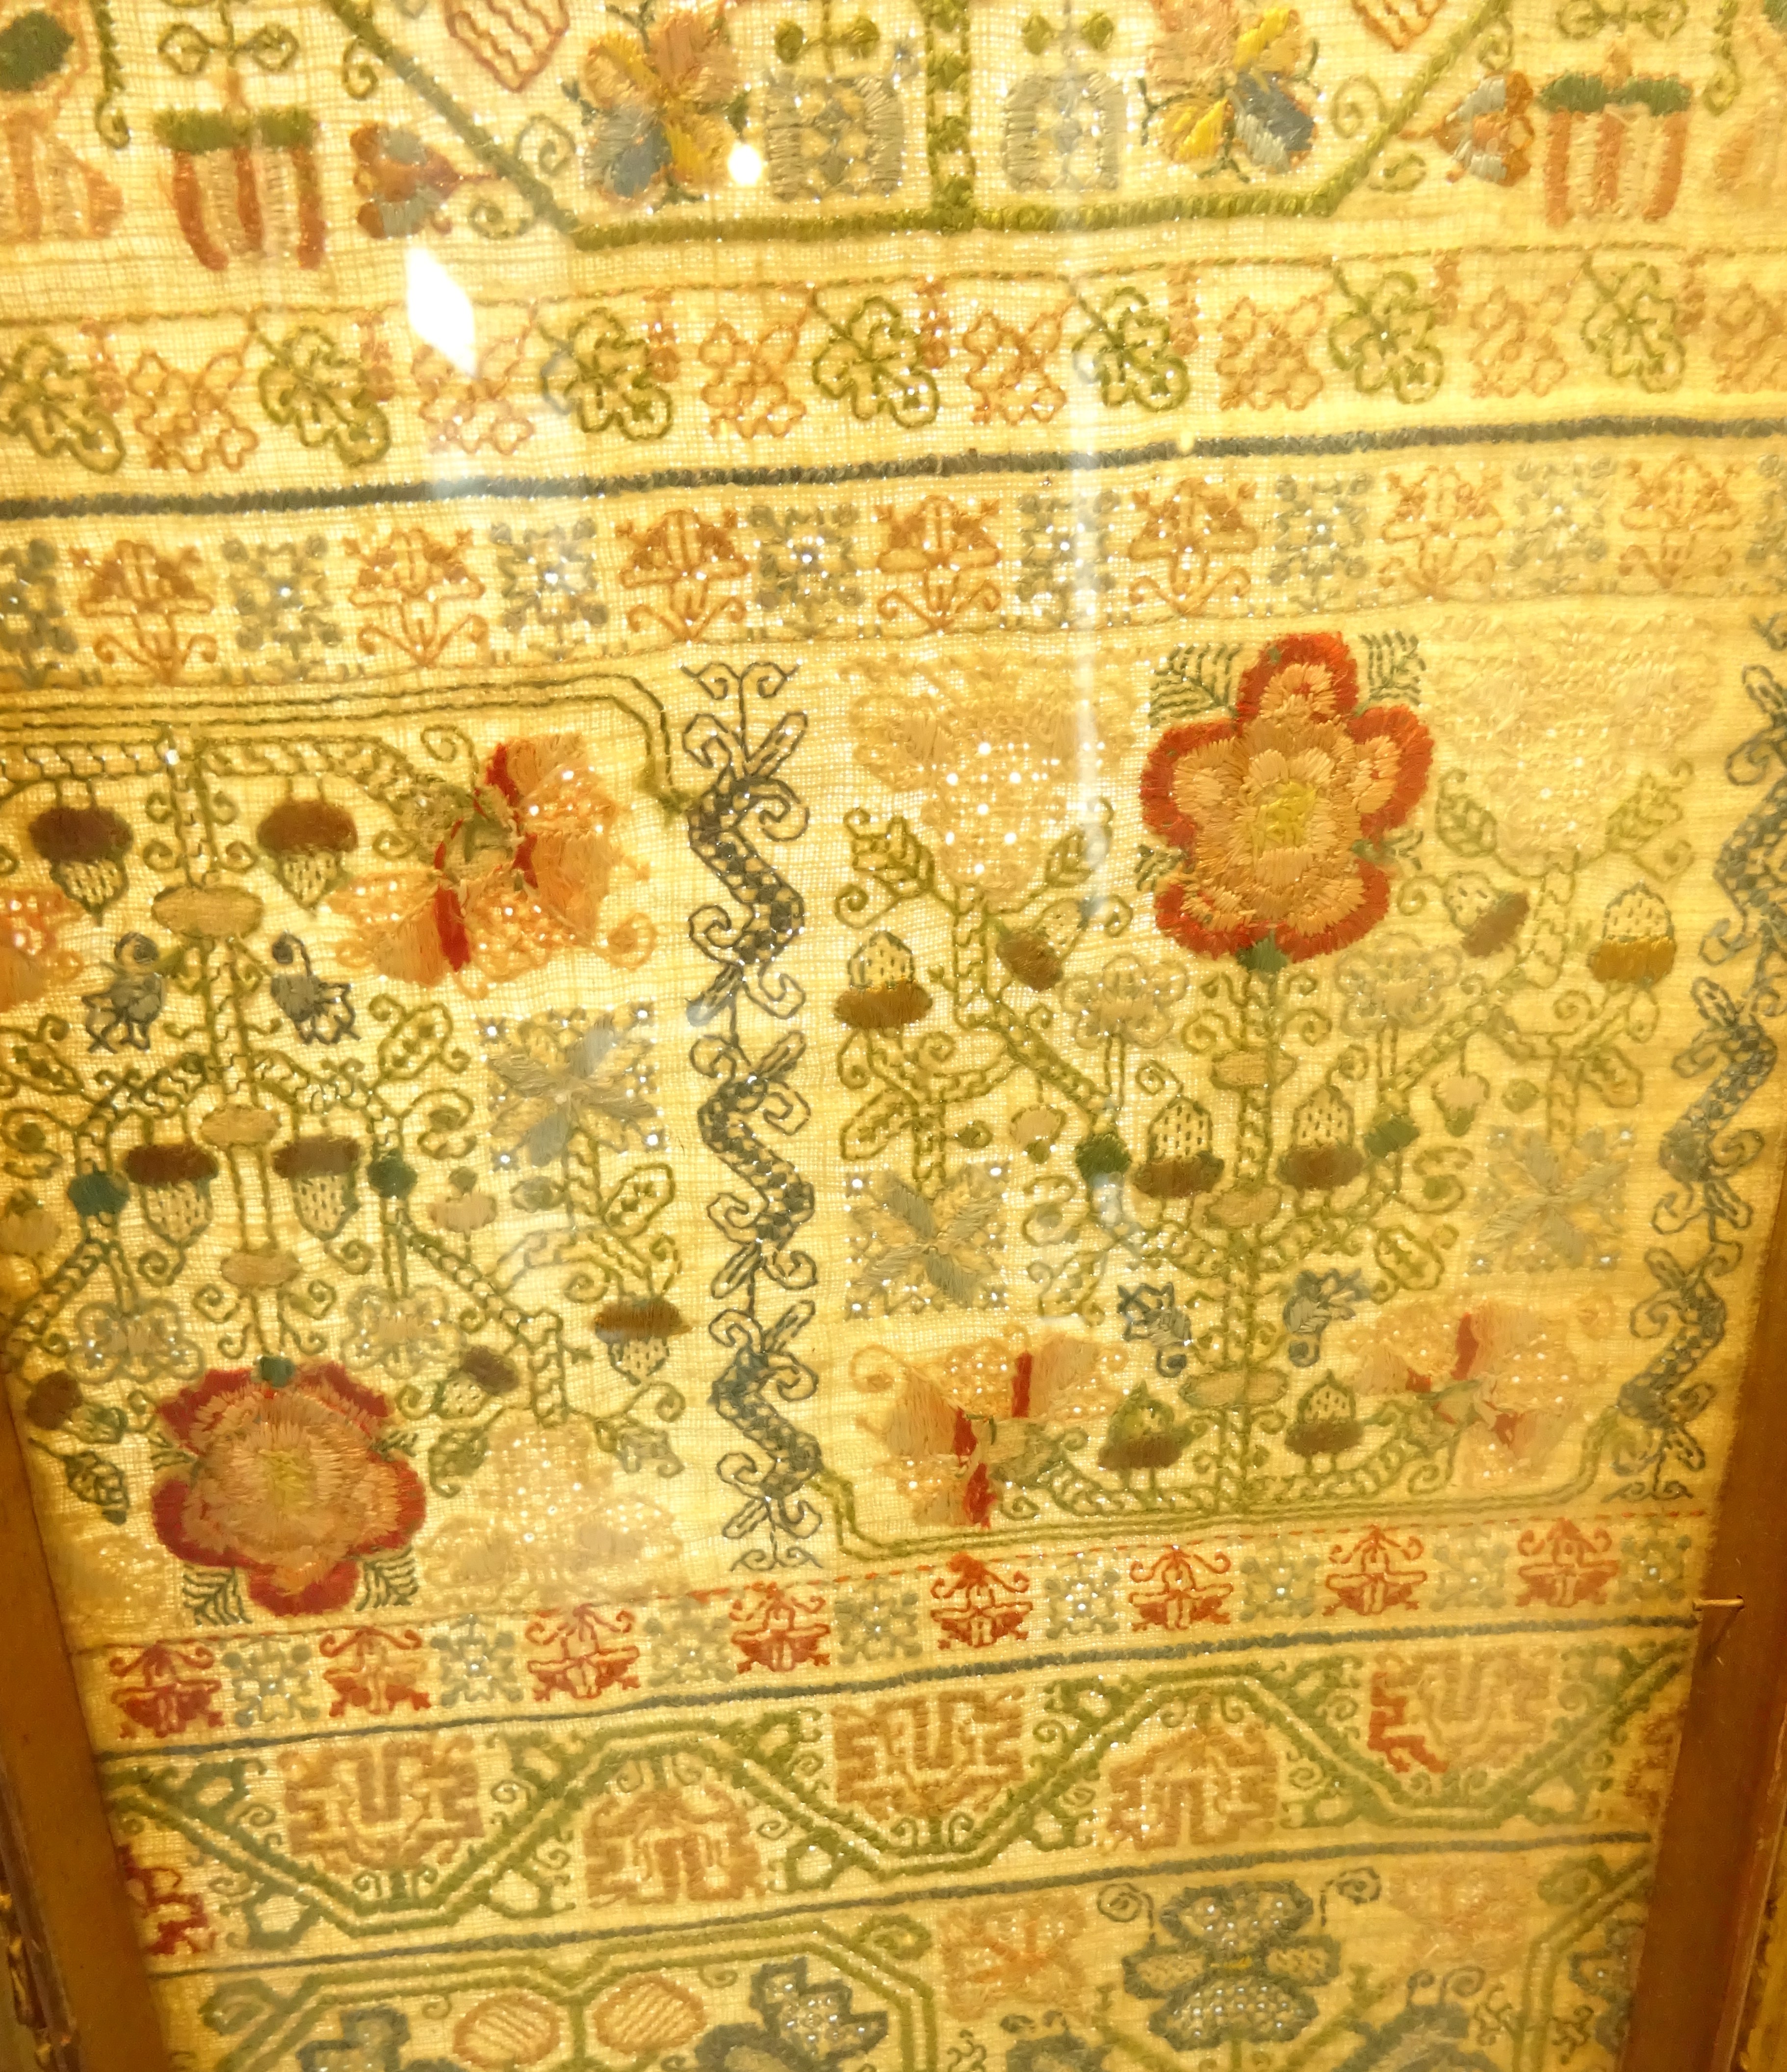 17th Century needlework band Sampler by Mary Kimesman, comprising floral bands of flower heads, - Image 4 of 8